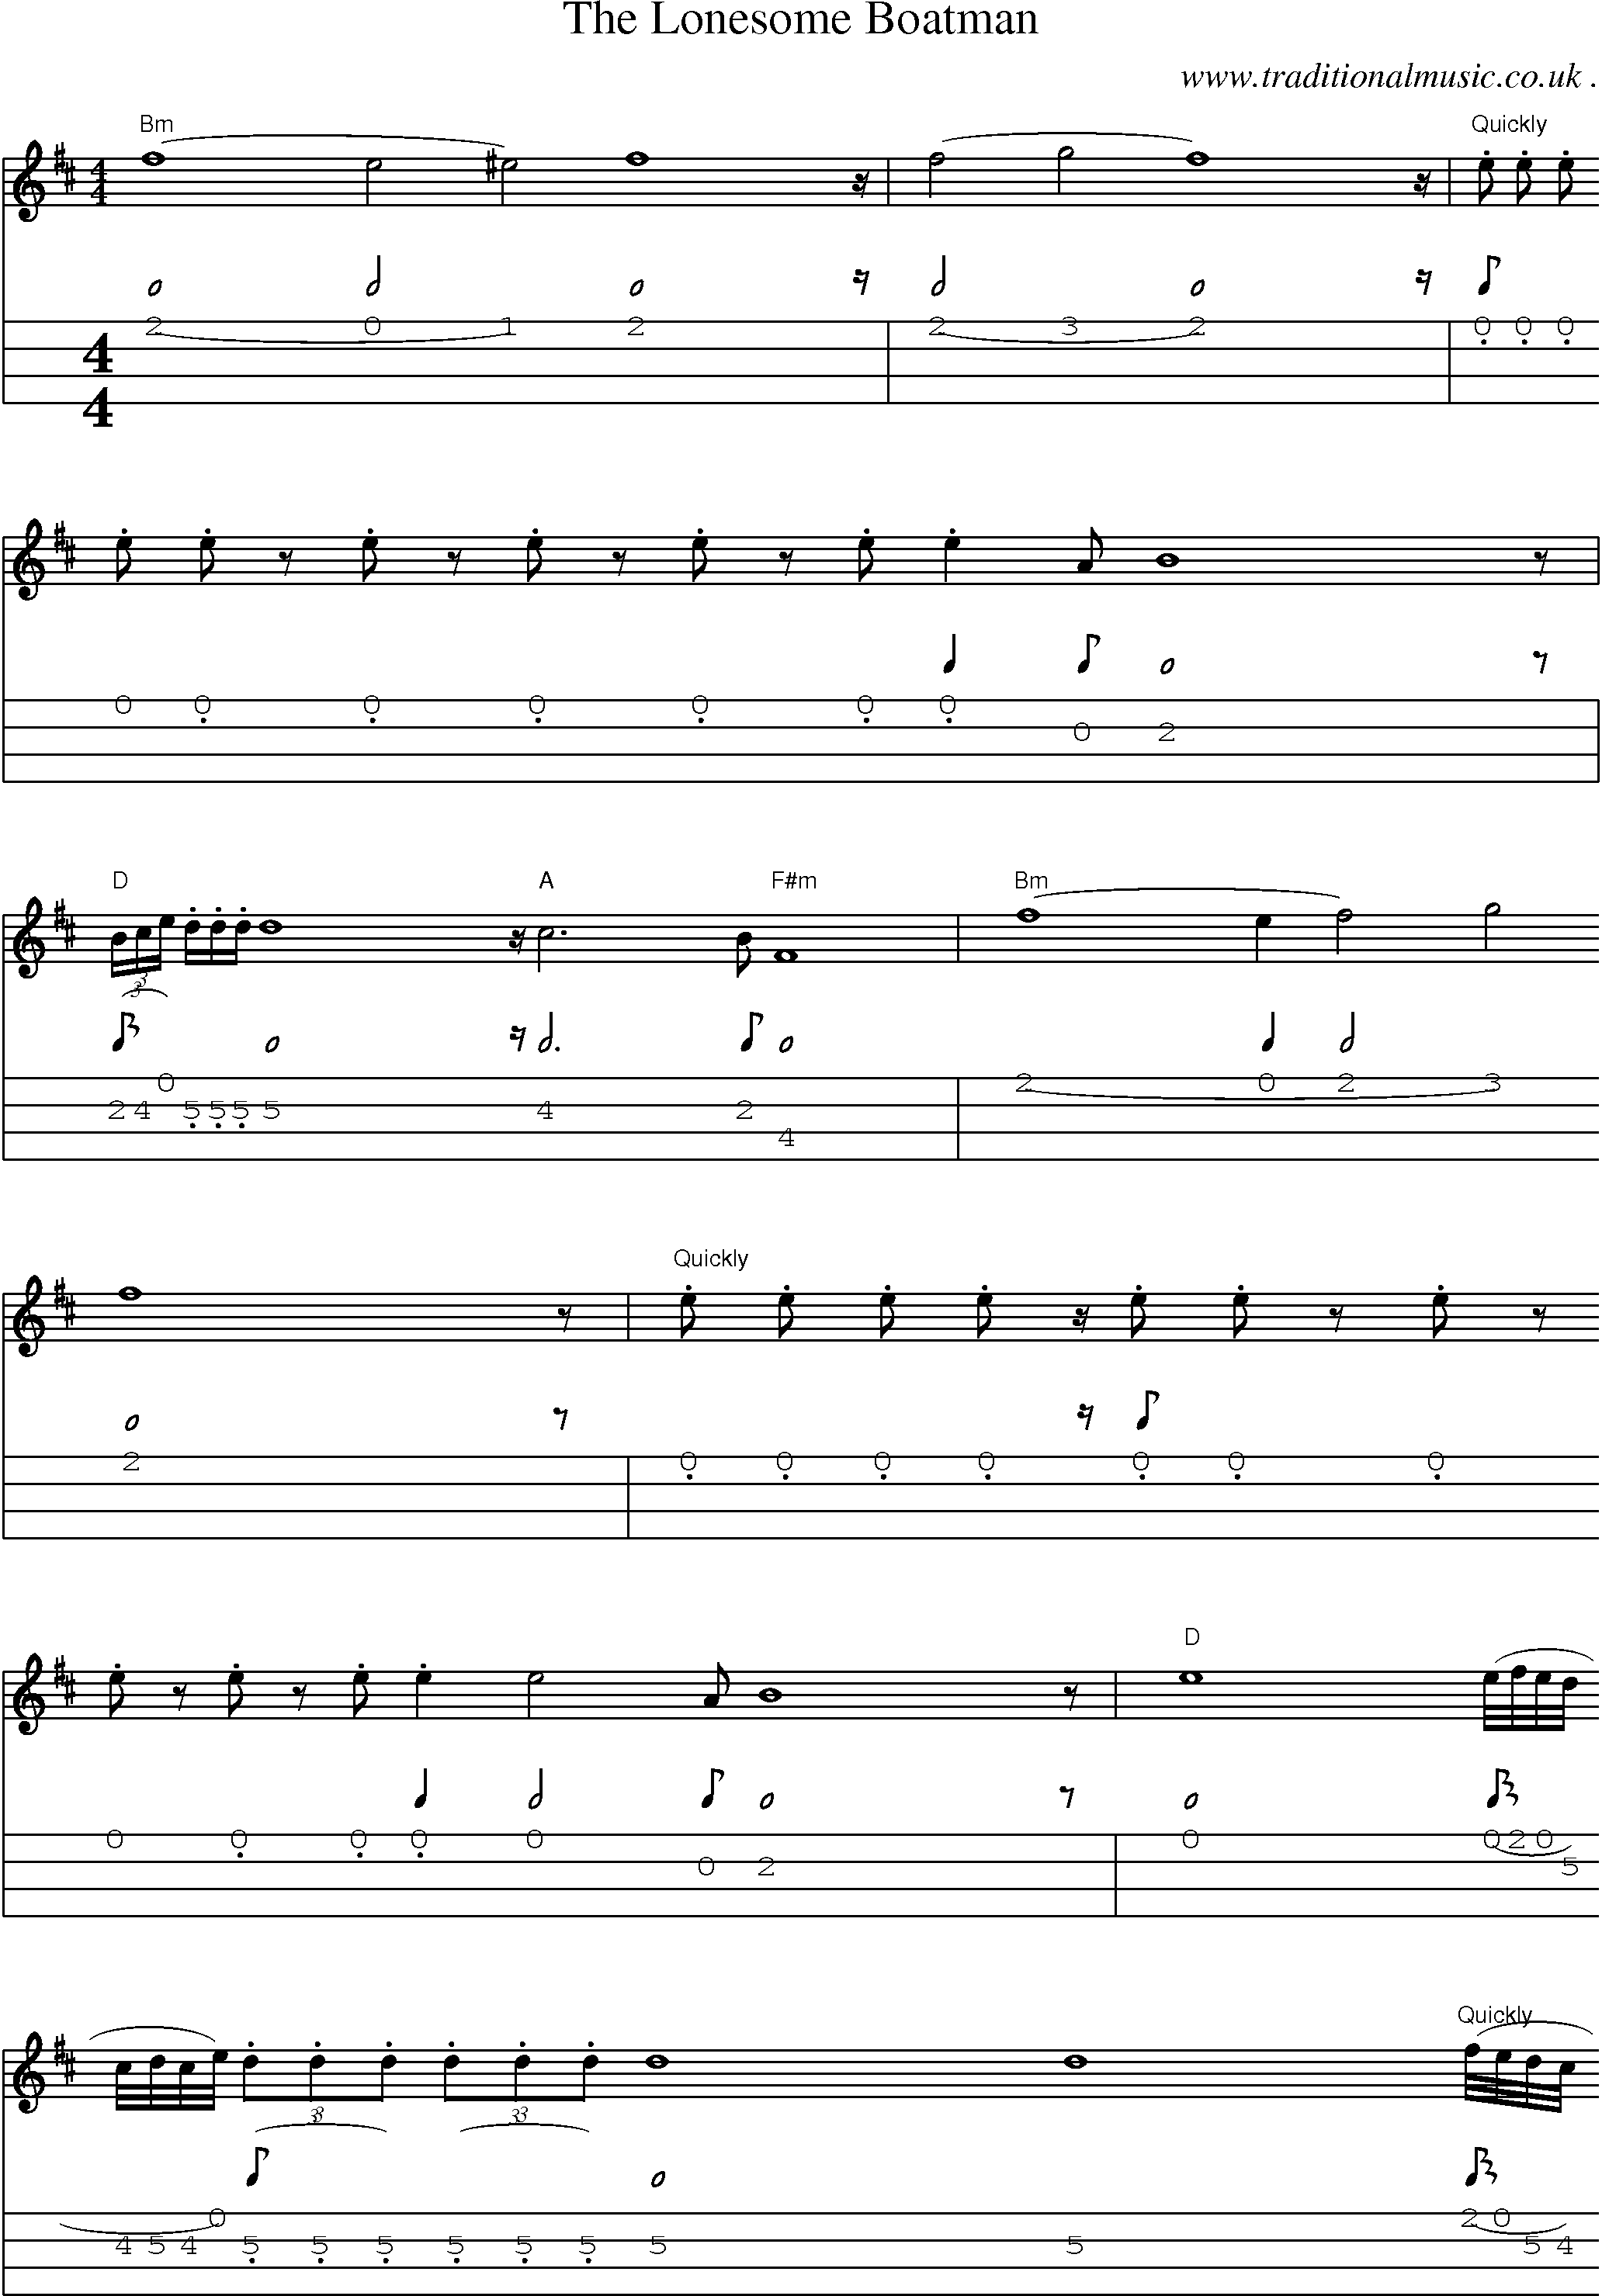 Sheet-Music and Mandolin Tabs for The Lonesome Boatman